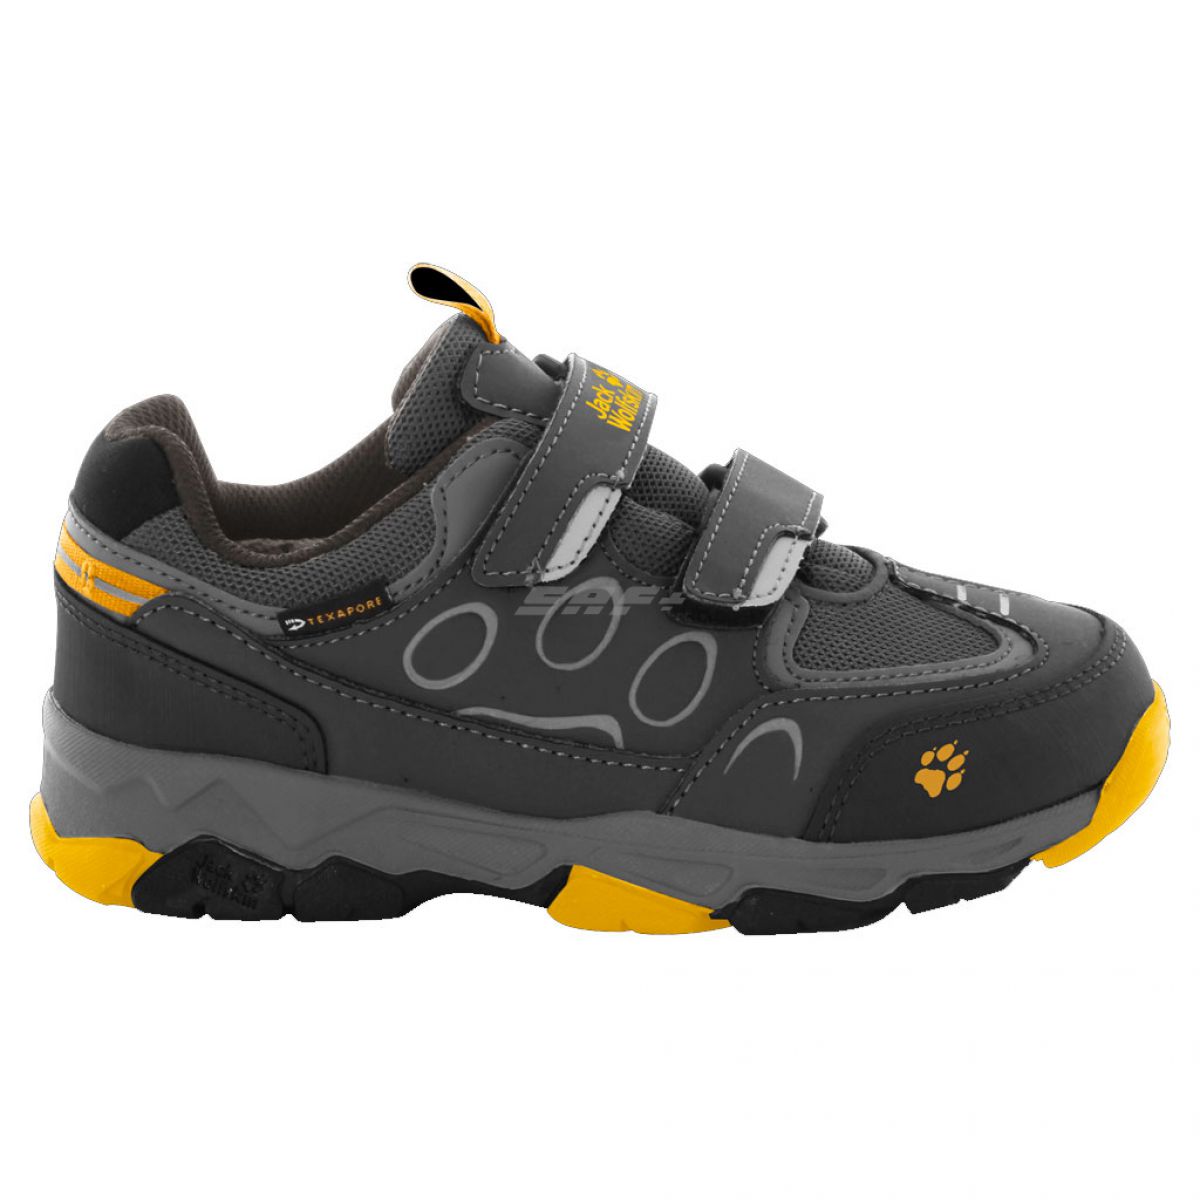 КРОССОВКИ JACK WOLFSKIN MTN ATTACK 2 TEXAPORE LOW VC INT